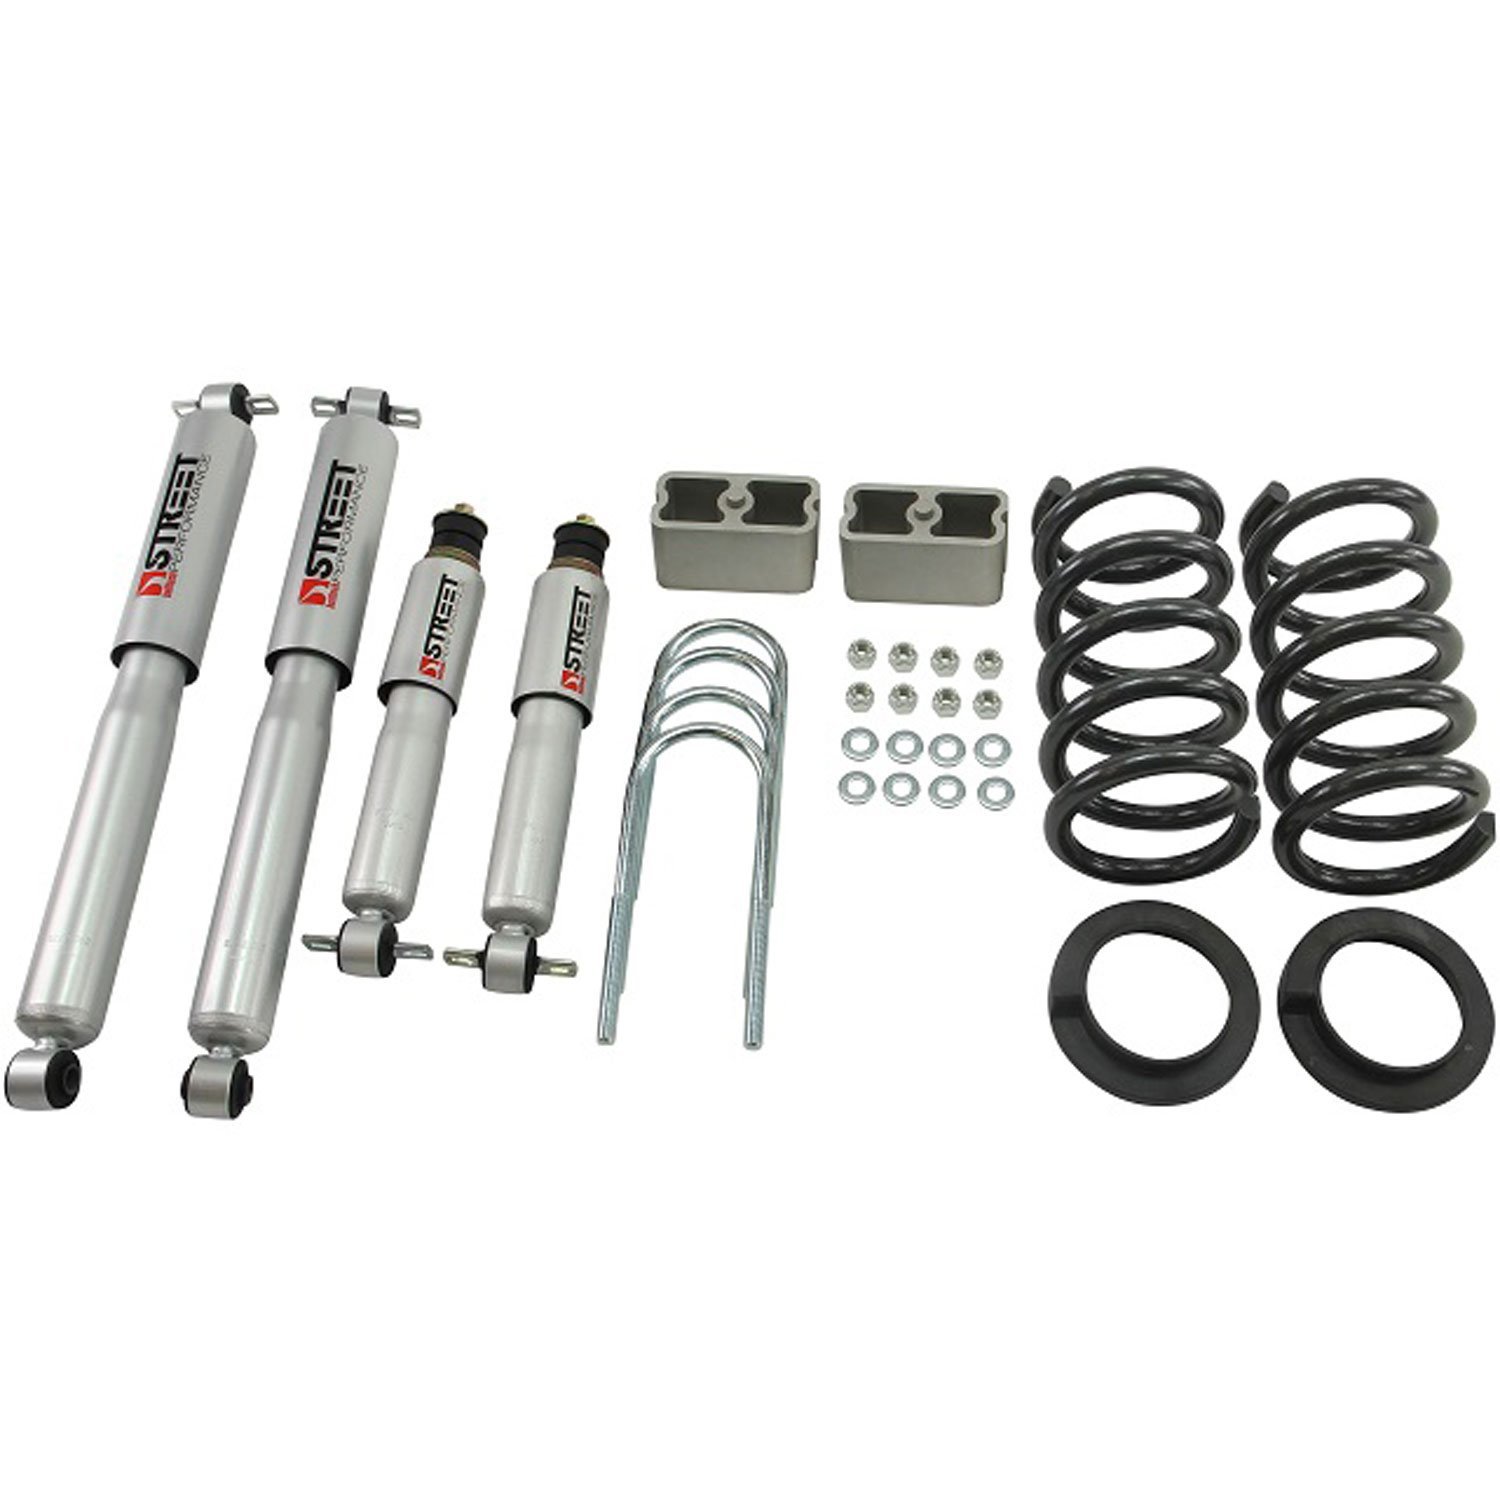 Complete Lowering Kit 1998-2003 Chevy Blazer/GMC Jimmy 6cyl